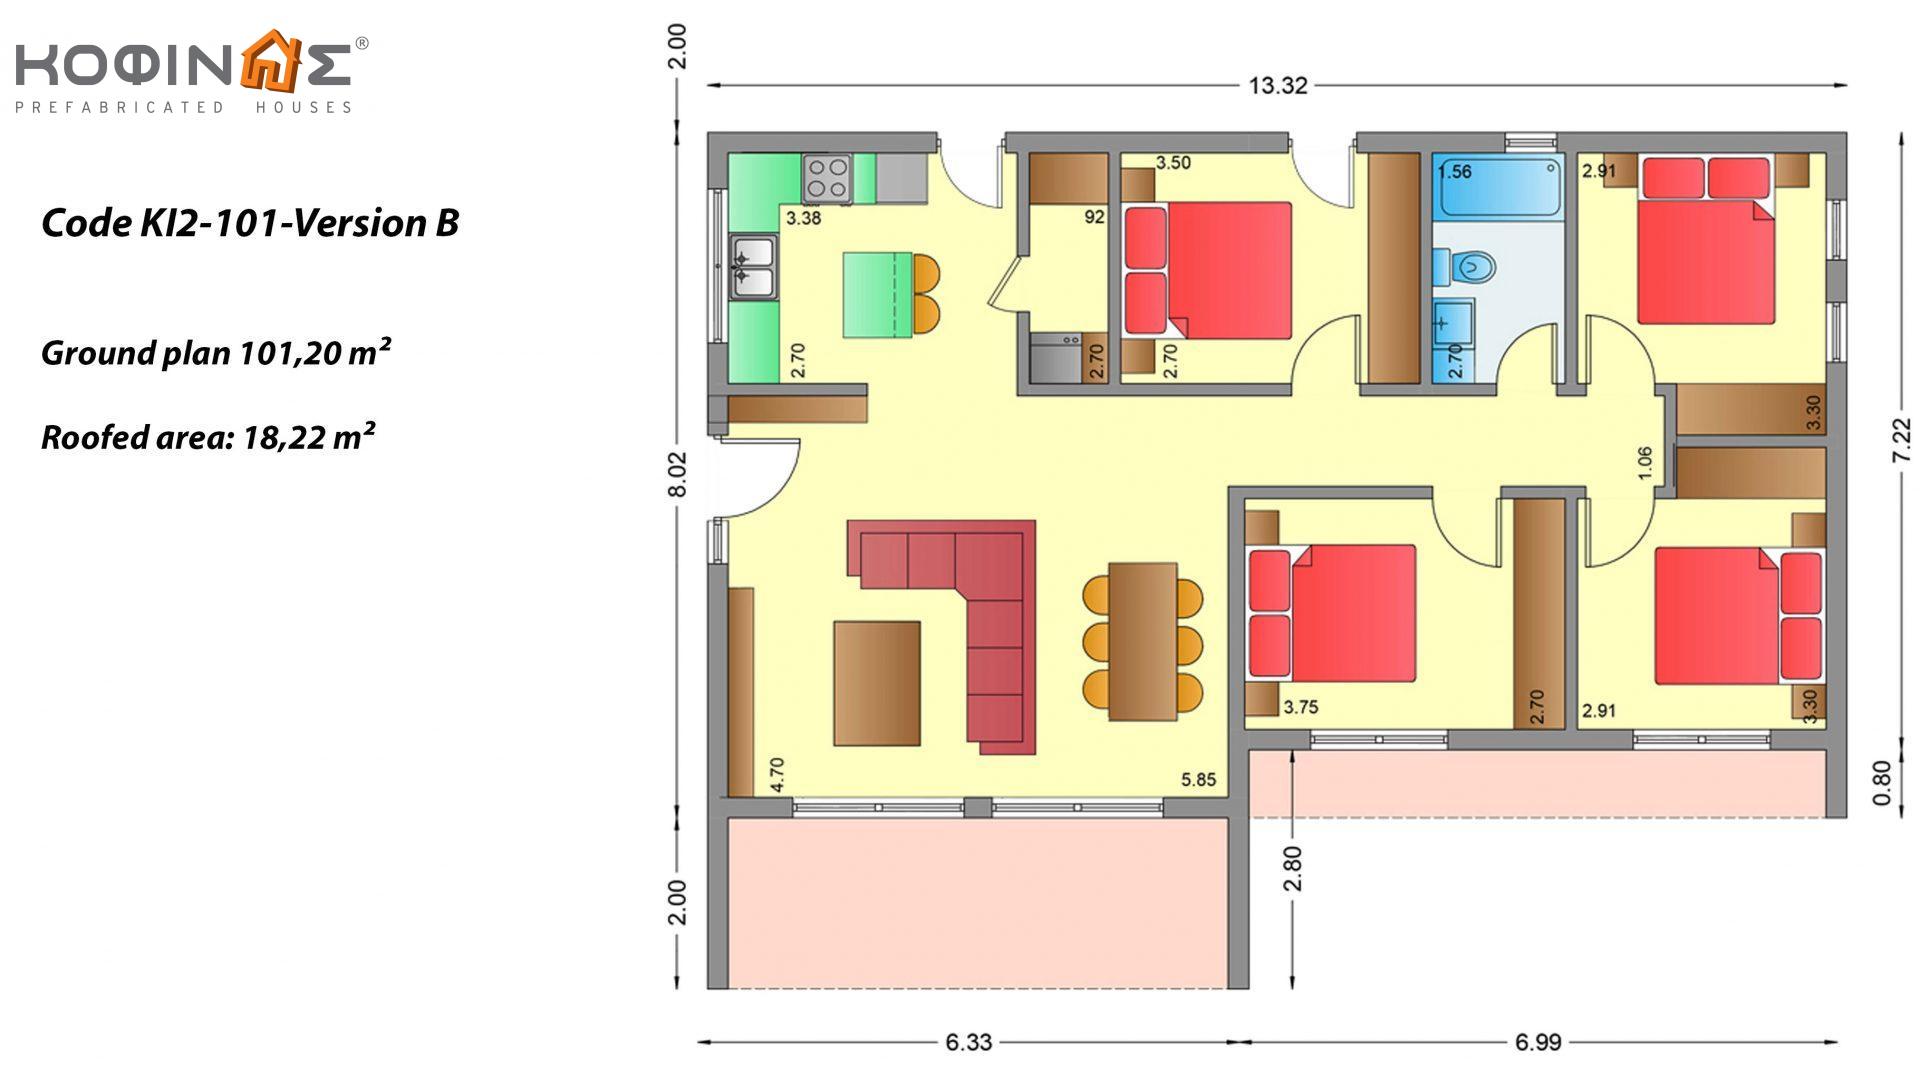 1-story house KI2-101, total surface of 101,20 m², covered roofed areas 18,22 m²